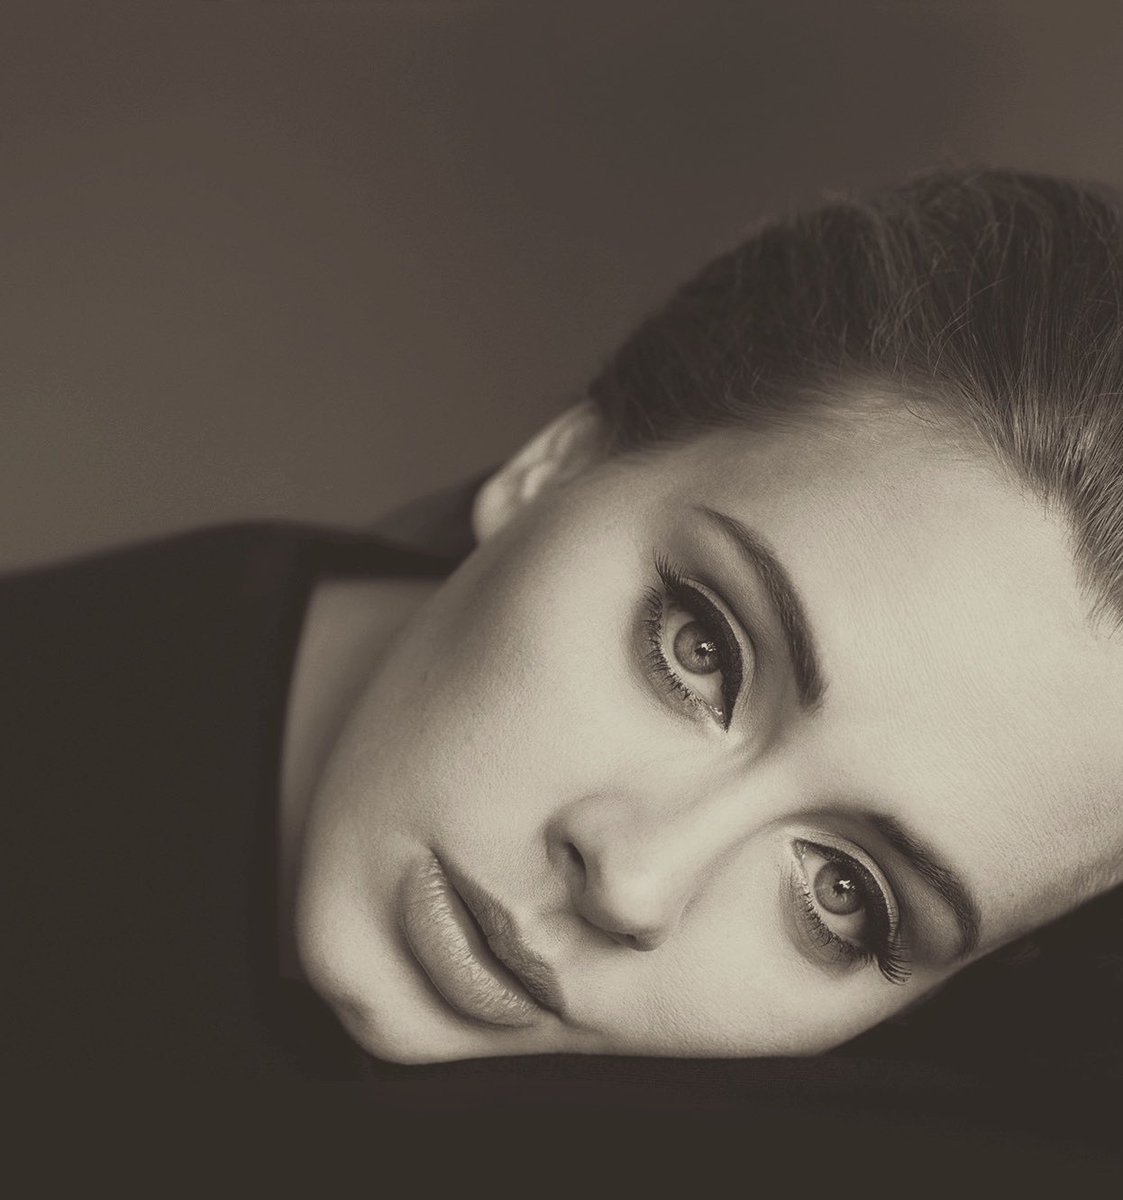 Released in 2015, @Adele’s “25” still holds the entire top 3 of biggest weeks for female albums in UK Official Albums Chart history, despite many attempts. #1. 800,307 copies — 1st week #2. 449,870 copies — 5th week #3. 439,337 copies — 2nd week